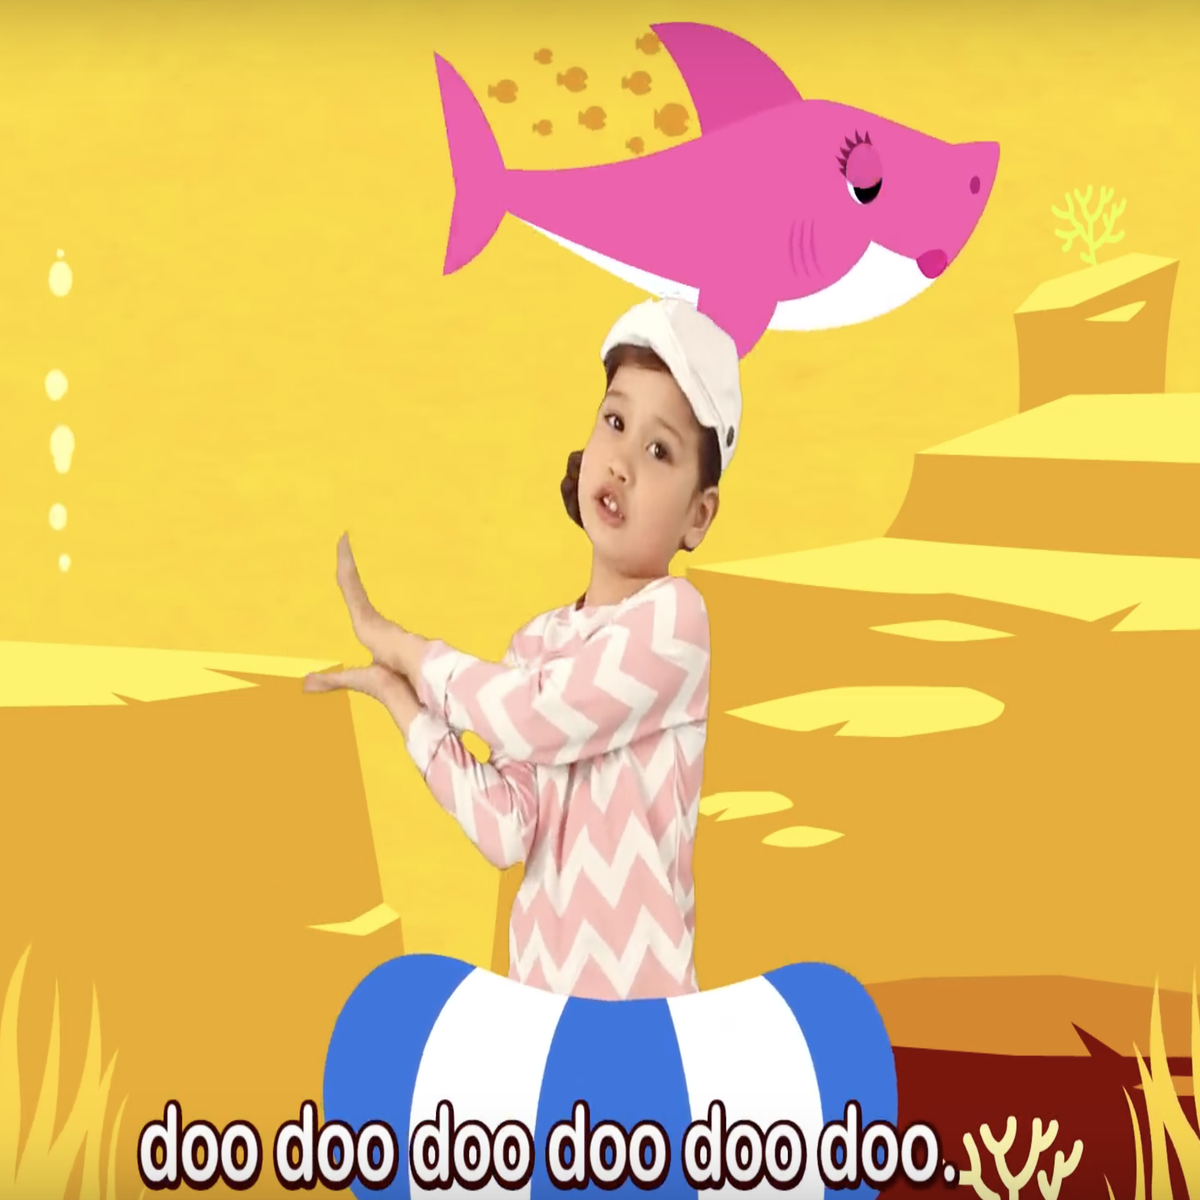 What Is Baby Shark? - Origins of Pinkfong's Viral Video